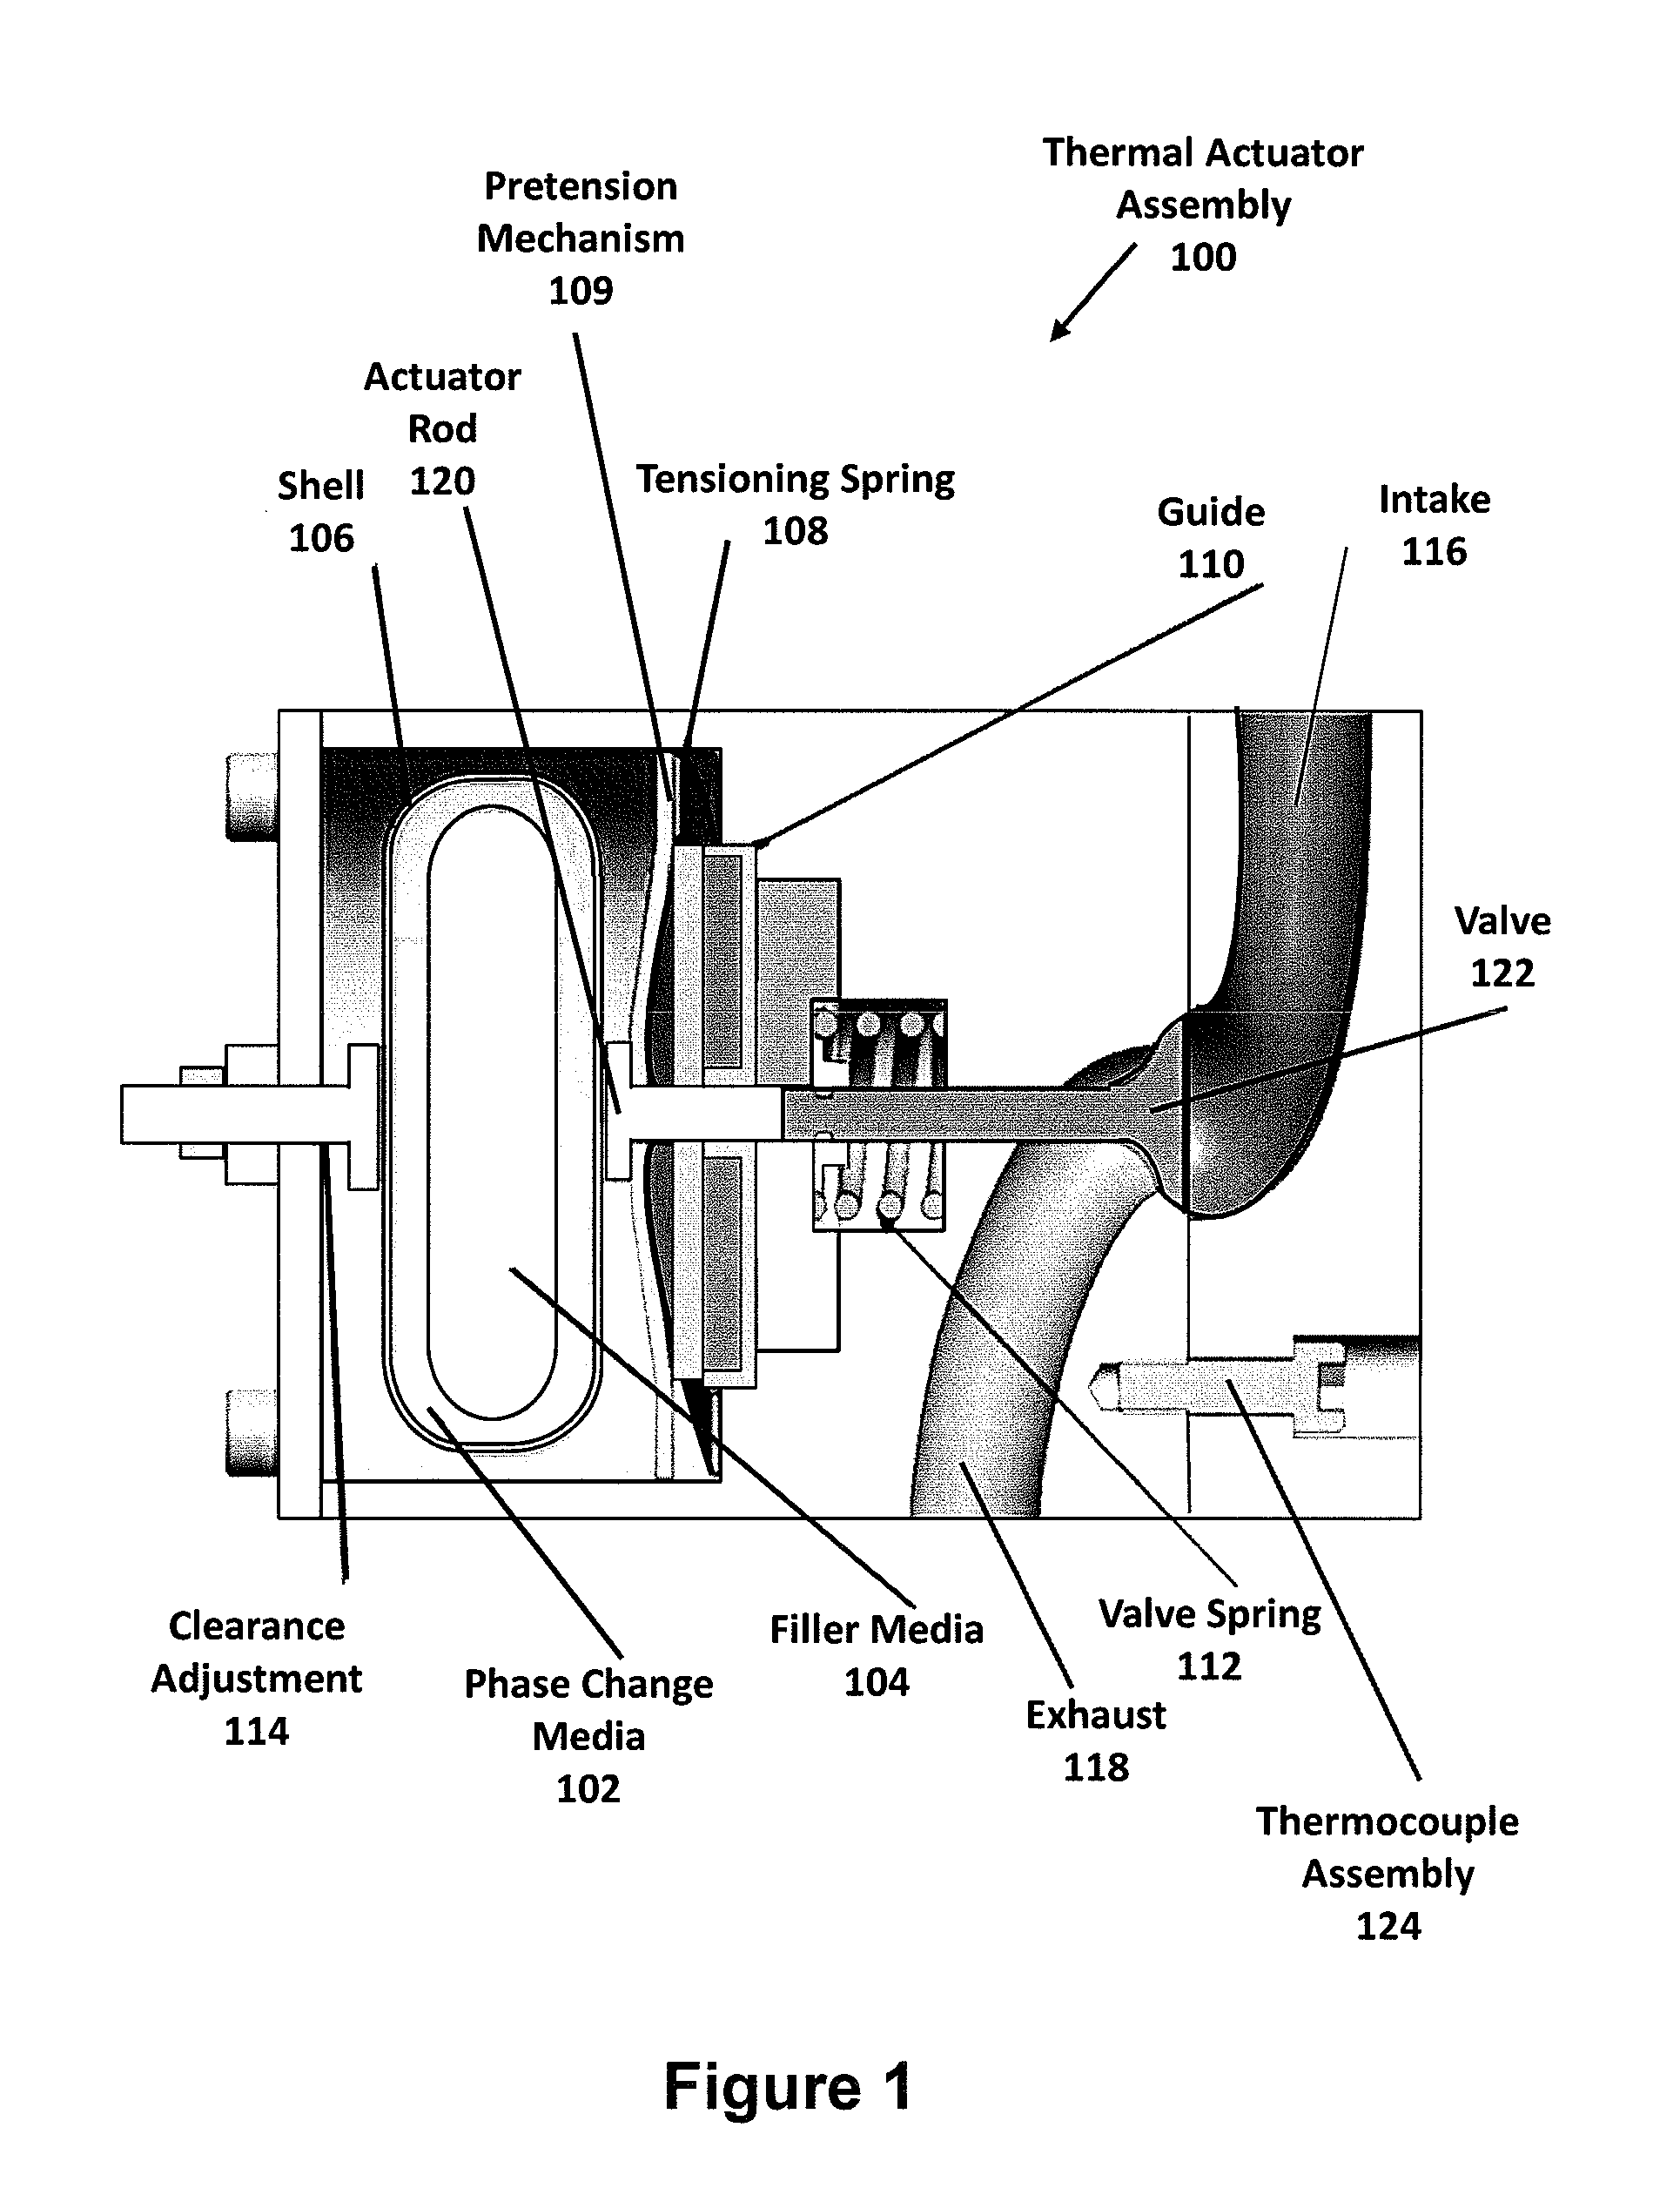 High-temperature thermal actuator utilizing phase change material